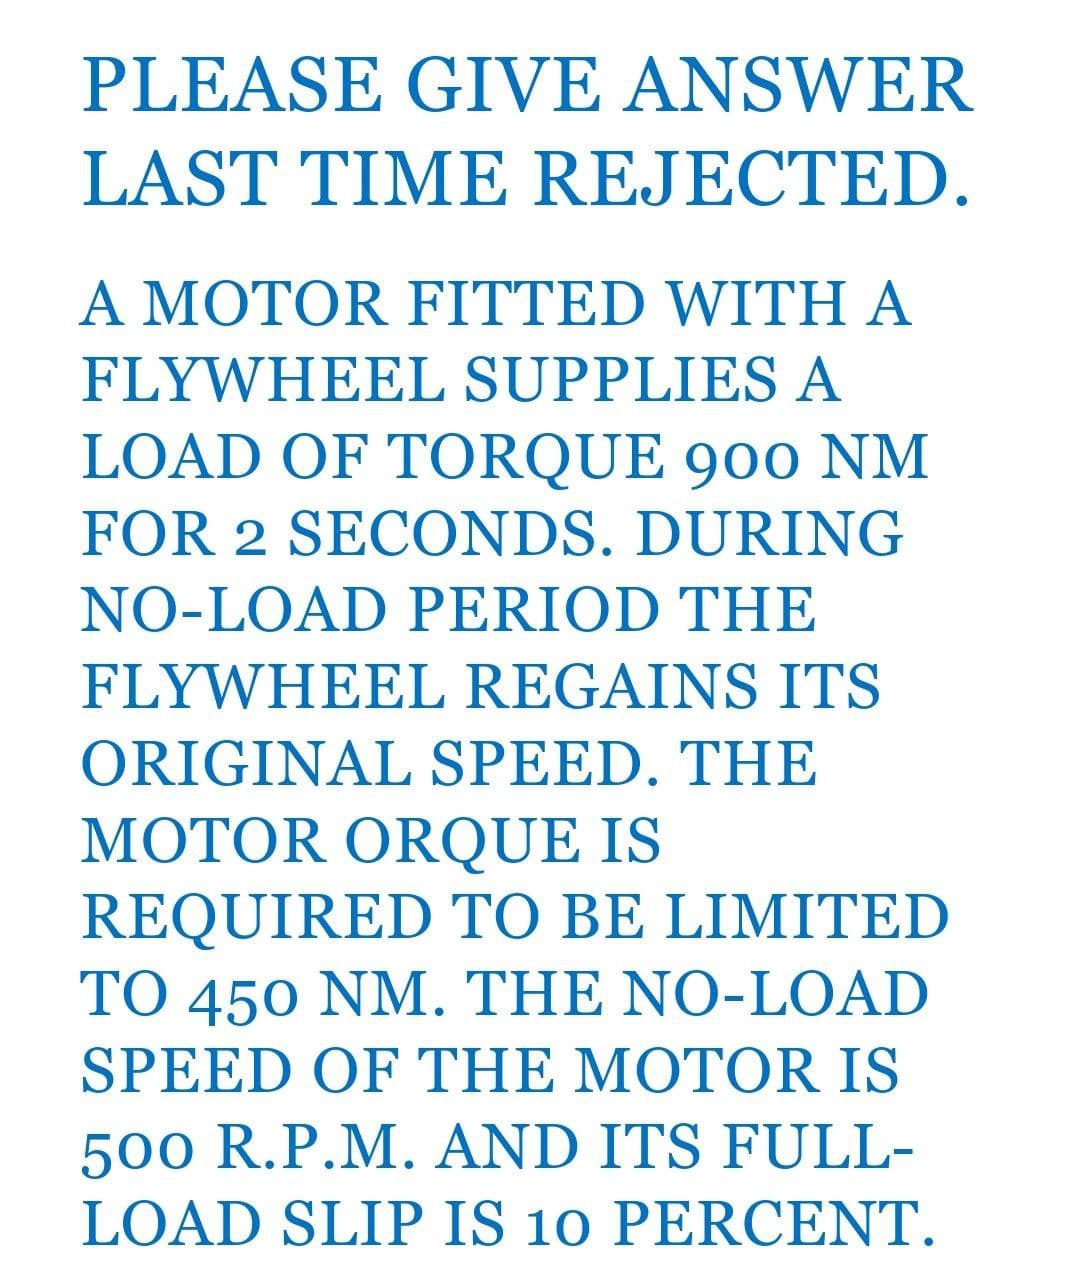 PLEASE GIVE ANSWER
LAST TIME REJECTED.
A MOTOR FITTED WITH A
FLYWHEEL SUPPLIES A
LOAD OF TORQUE 900 NM
FOR 2 SECONDS. DURING
NO-LOAD PERIOD THE
FLYWHEEL REGAINS ITS
ORIGINAL SPEED. THE
MOTOR ORQUE IS
REQUIRED TO BE LIMITED
TO 450 NM. THE NO-LOAD
SPEED OF THE MOTOR IS
500 R.P.M. AND ITS FULL-
LOAD SLIP IS 10 PERCENT.